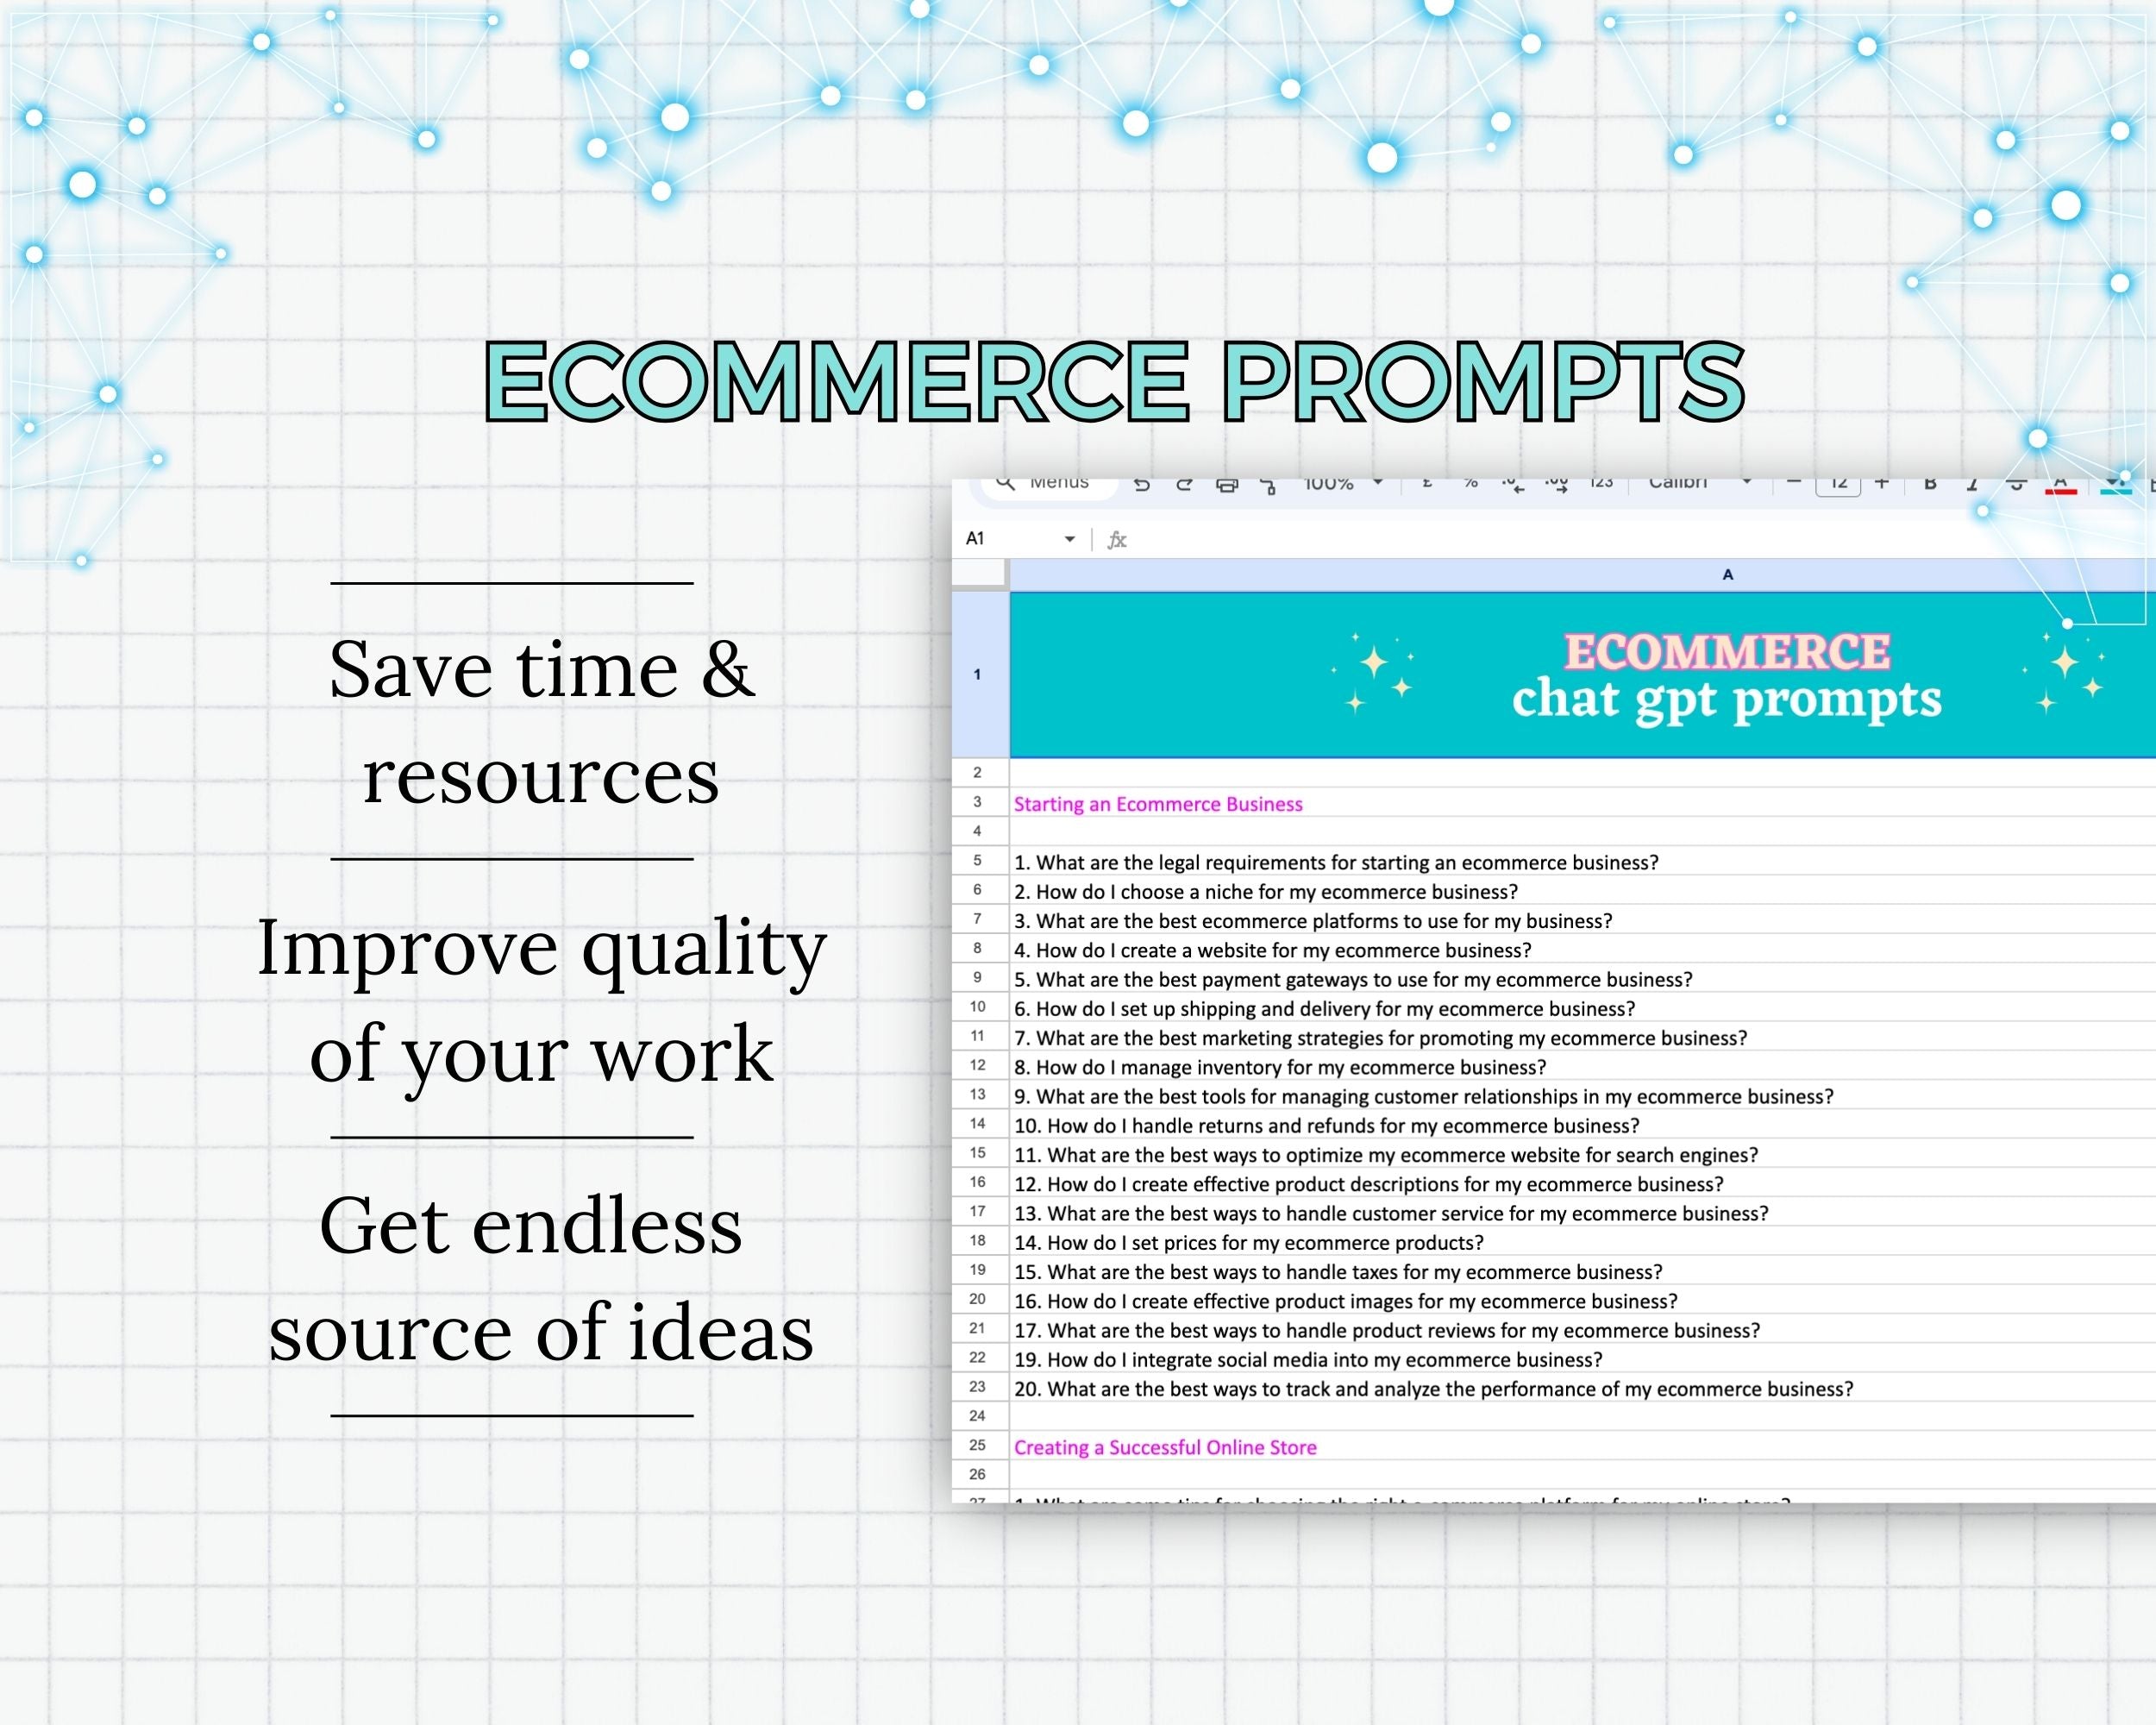 500+ Chat GPT Prompts for Ecommerce